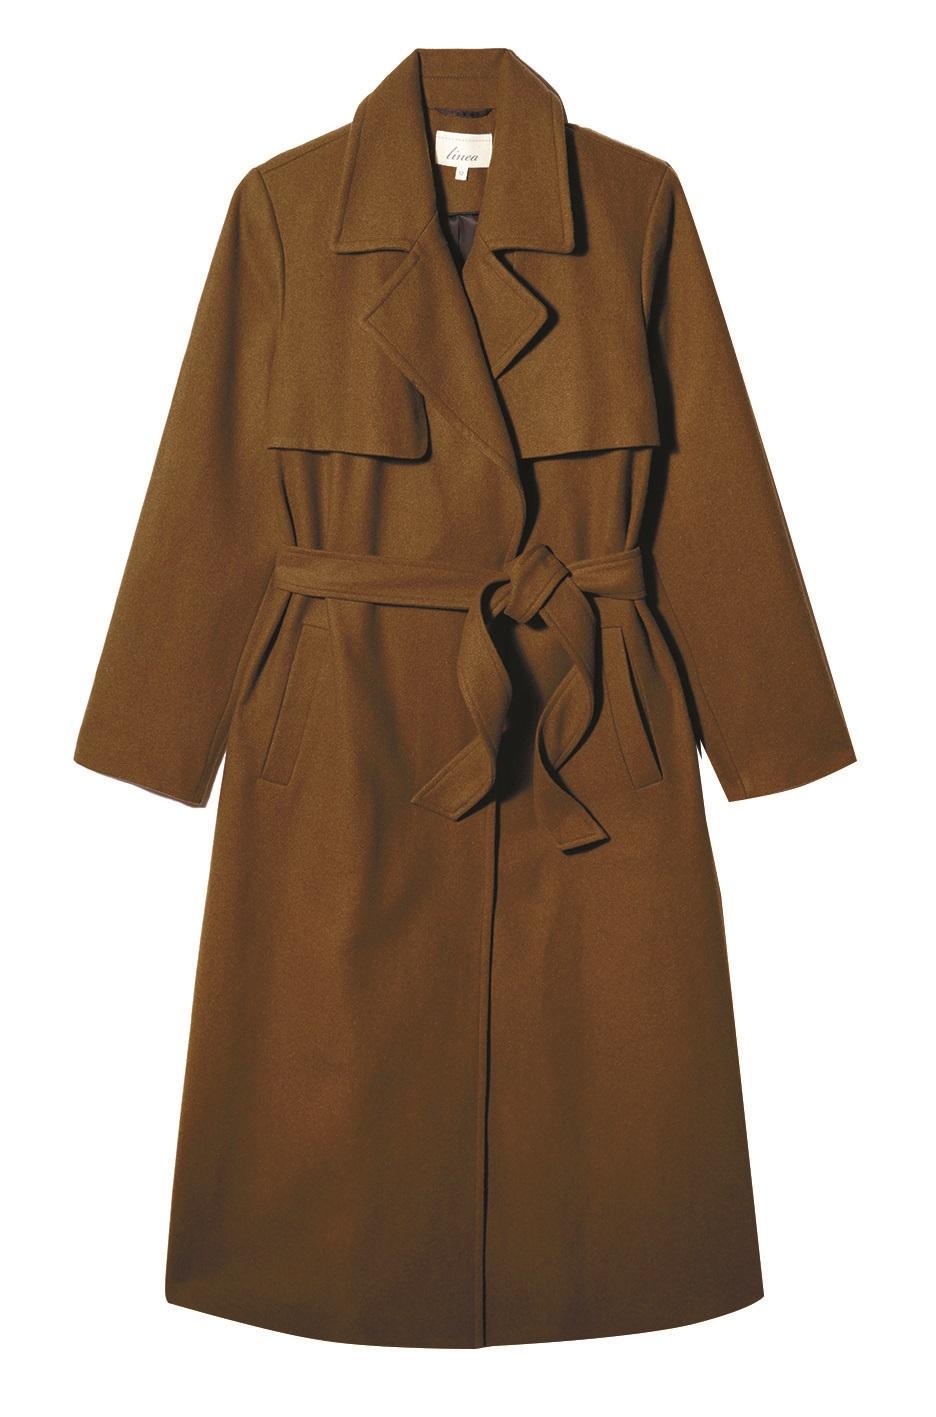 House of Fraser, Linea Green Belted Trench Coat, £199